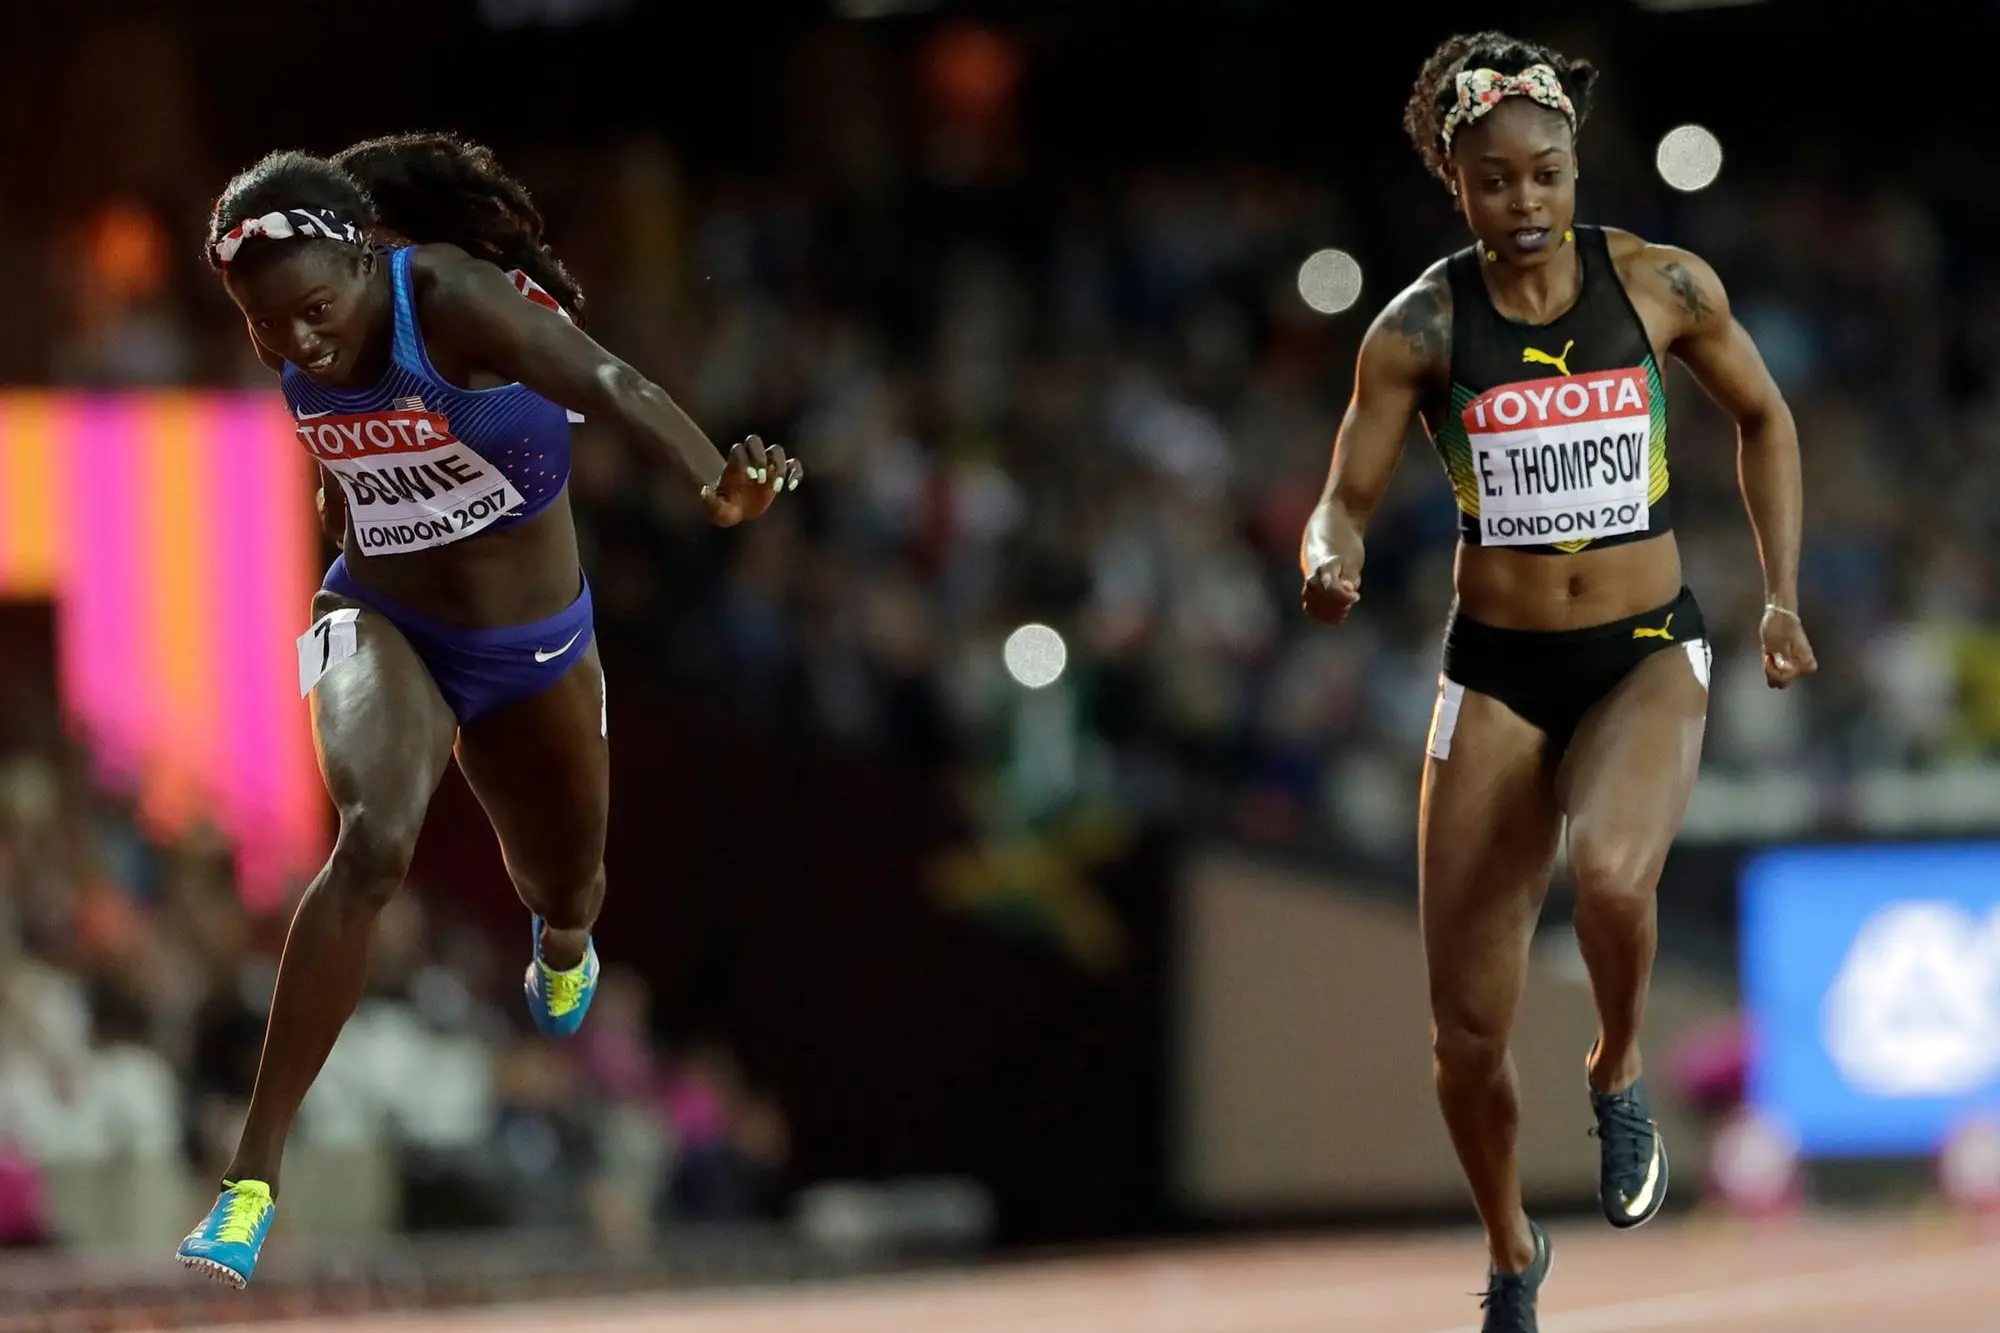 United States' Tori Bowie, left, dips to win the gold medal in the Women's 100m final during the World Athletics Championships in London Sunday, Aug. 6, 2017. (AP Photo/David J. Phillip)